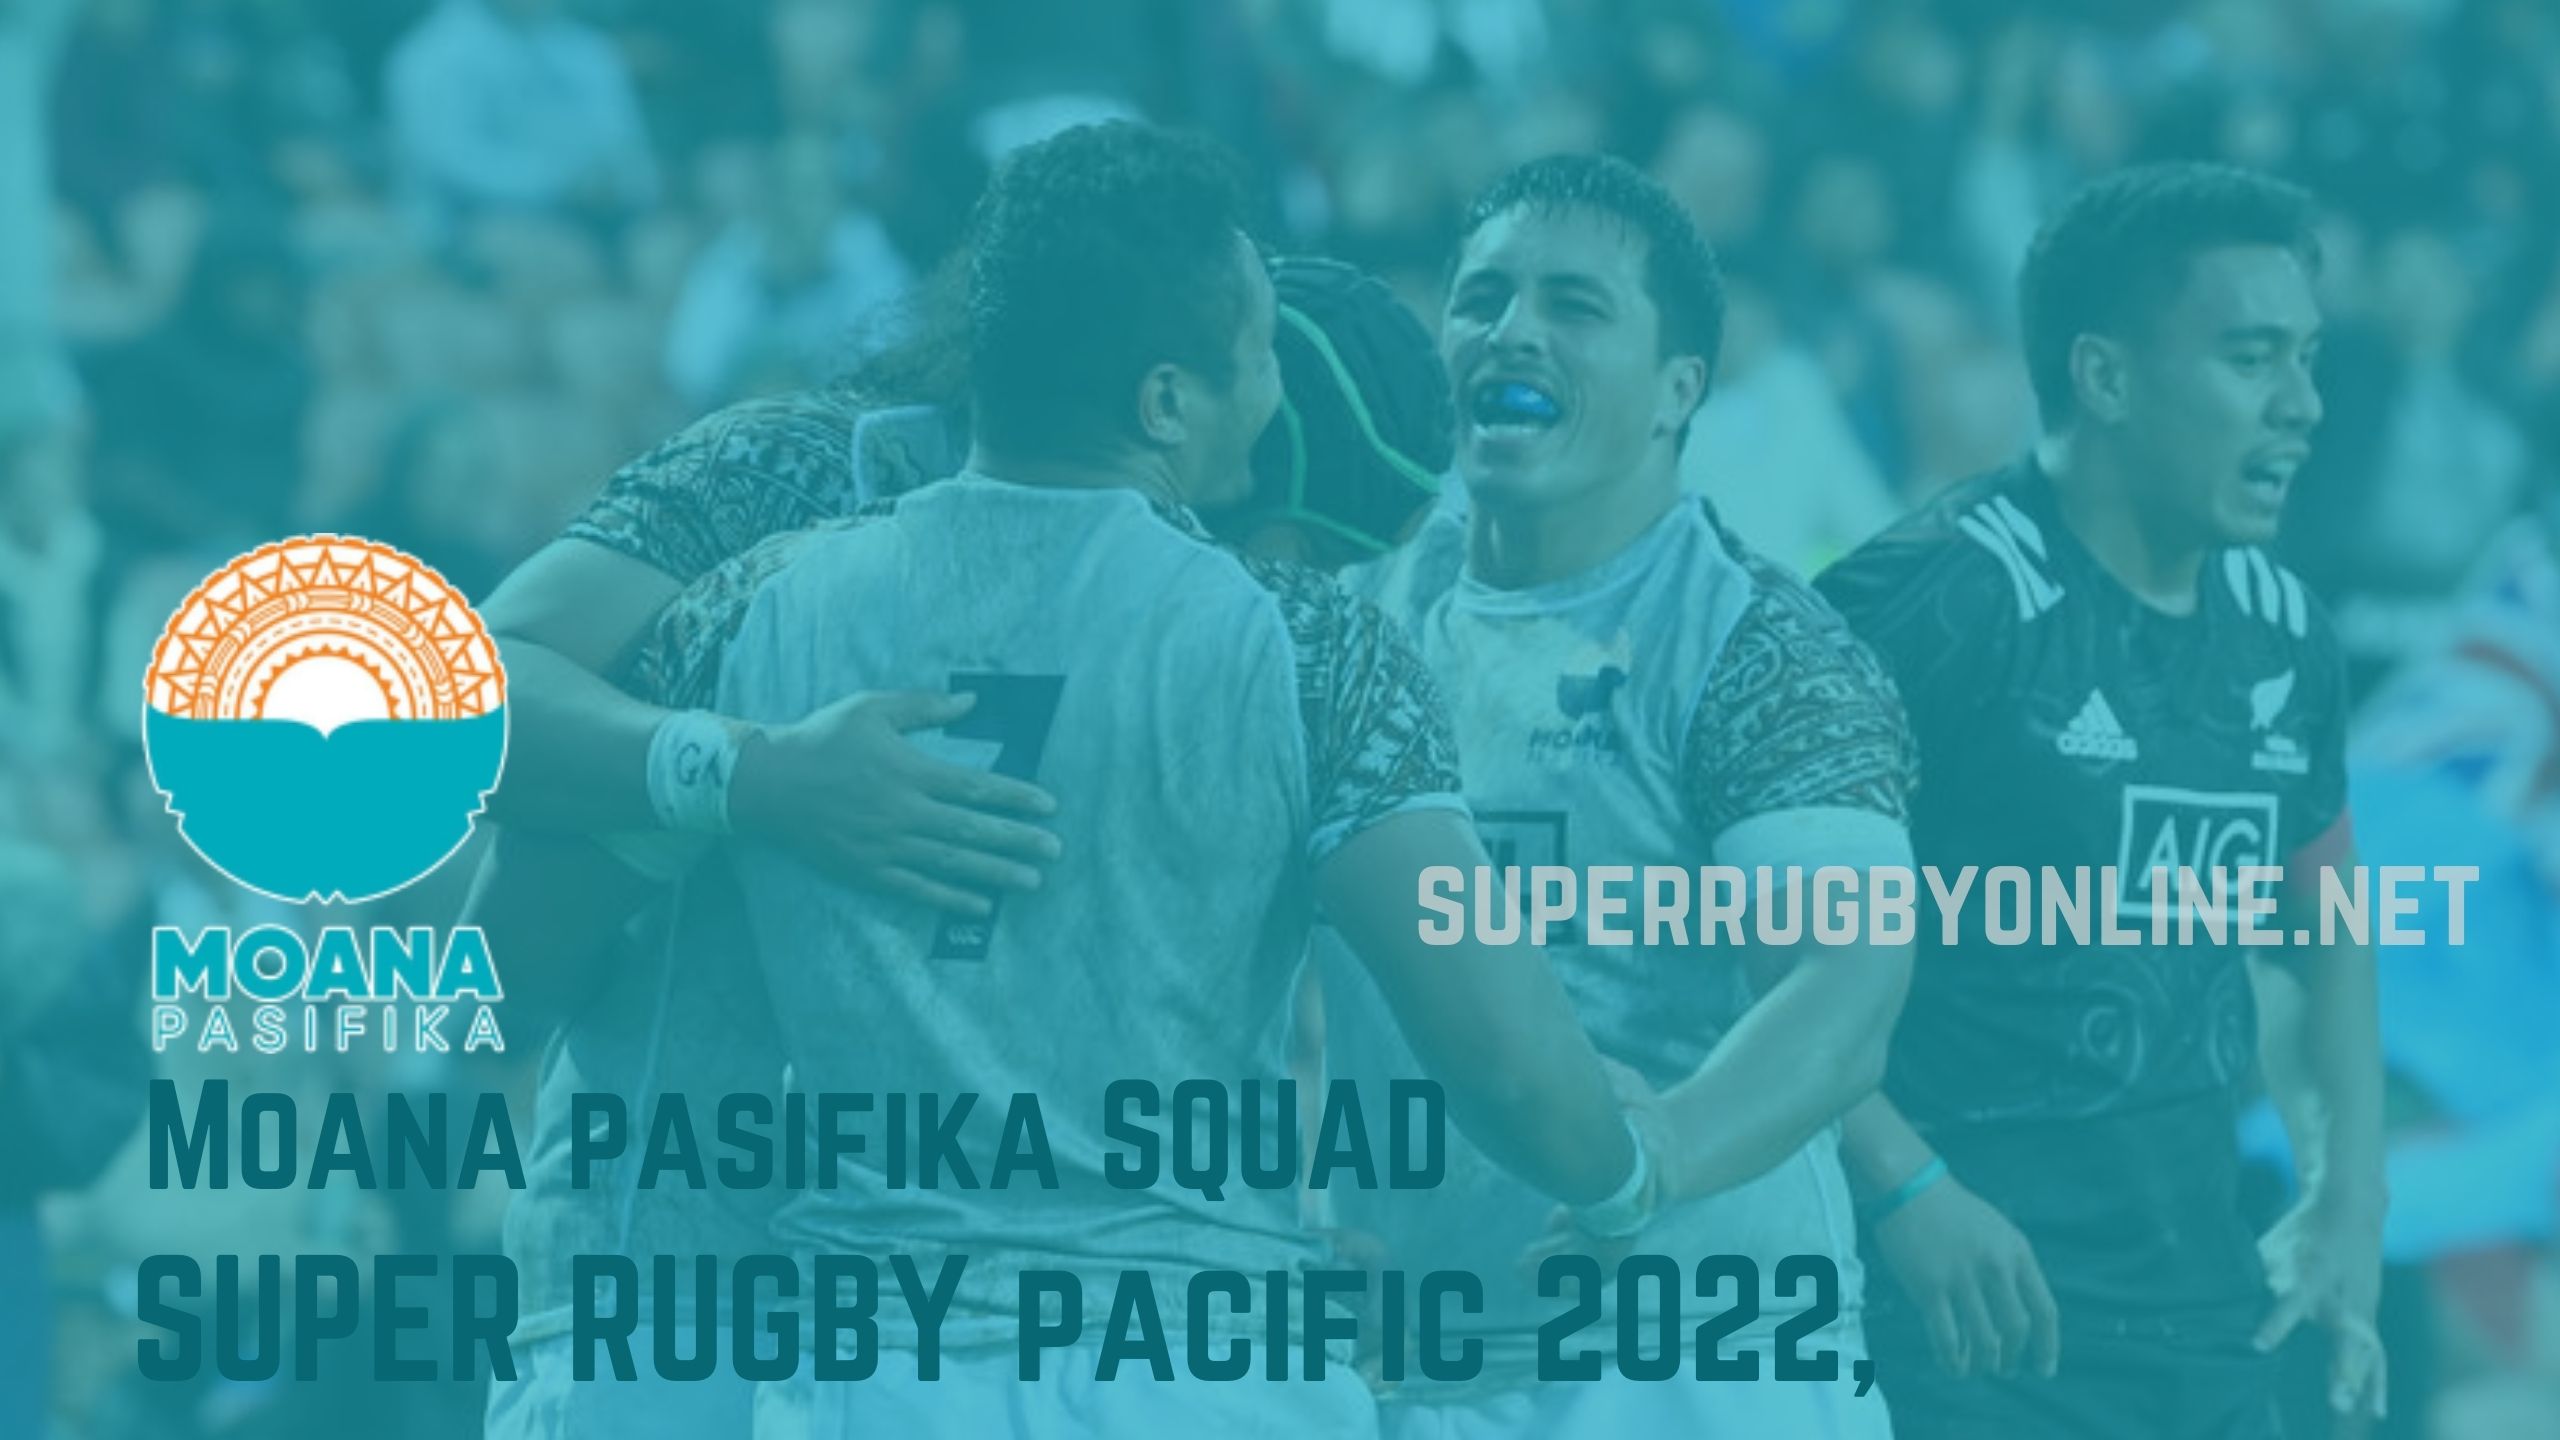 moana-pasifika-super-rugby-pacific-squad